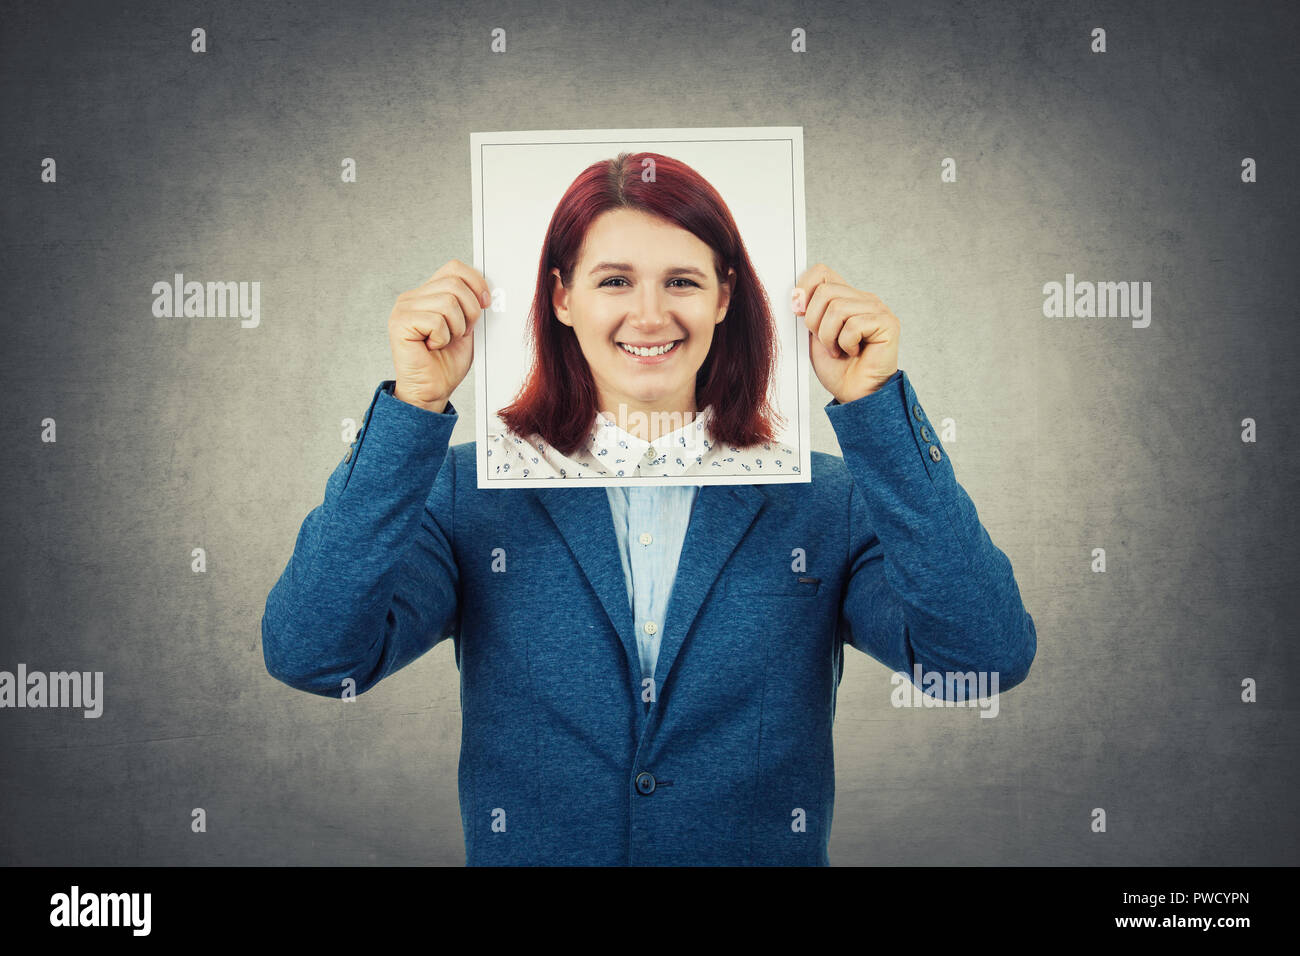 Man covering his face using a woman portrait, like a mask for hiding his identity. Business undercover, hide behind fake personality. Stock Photo